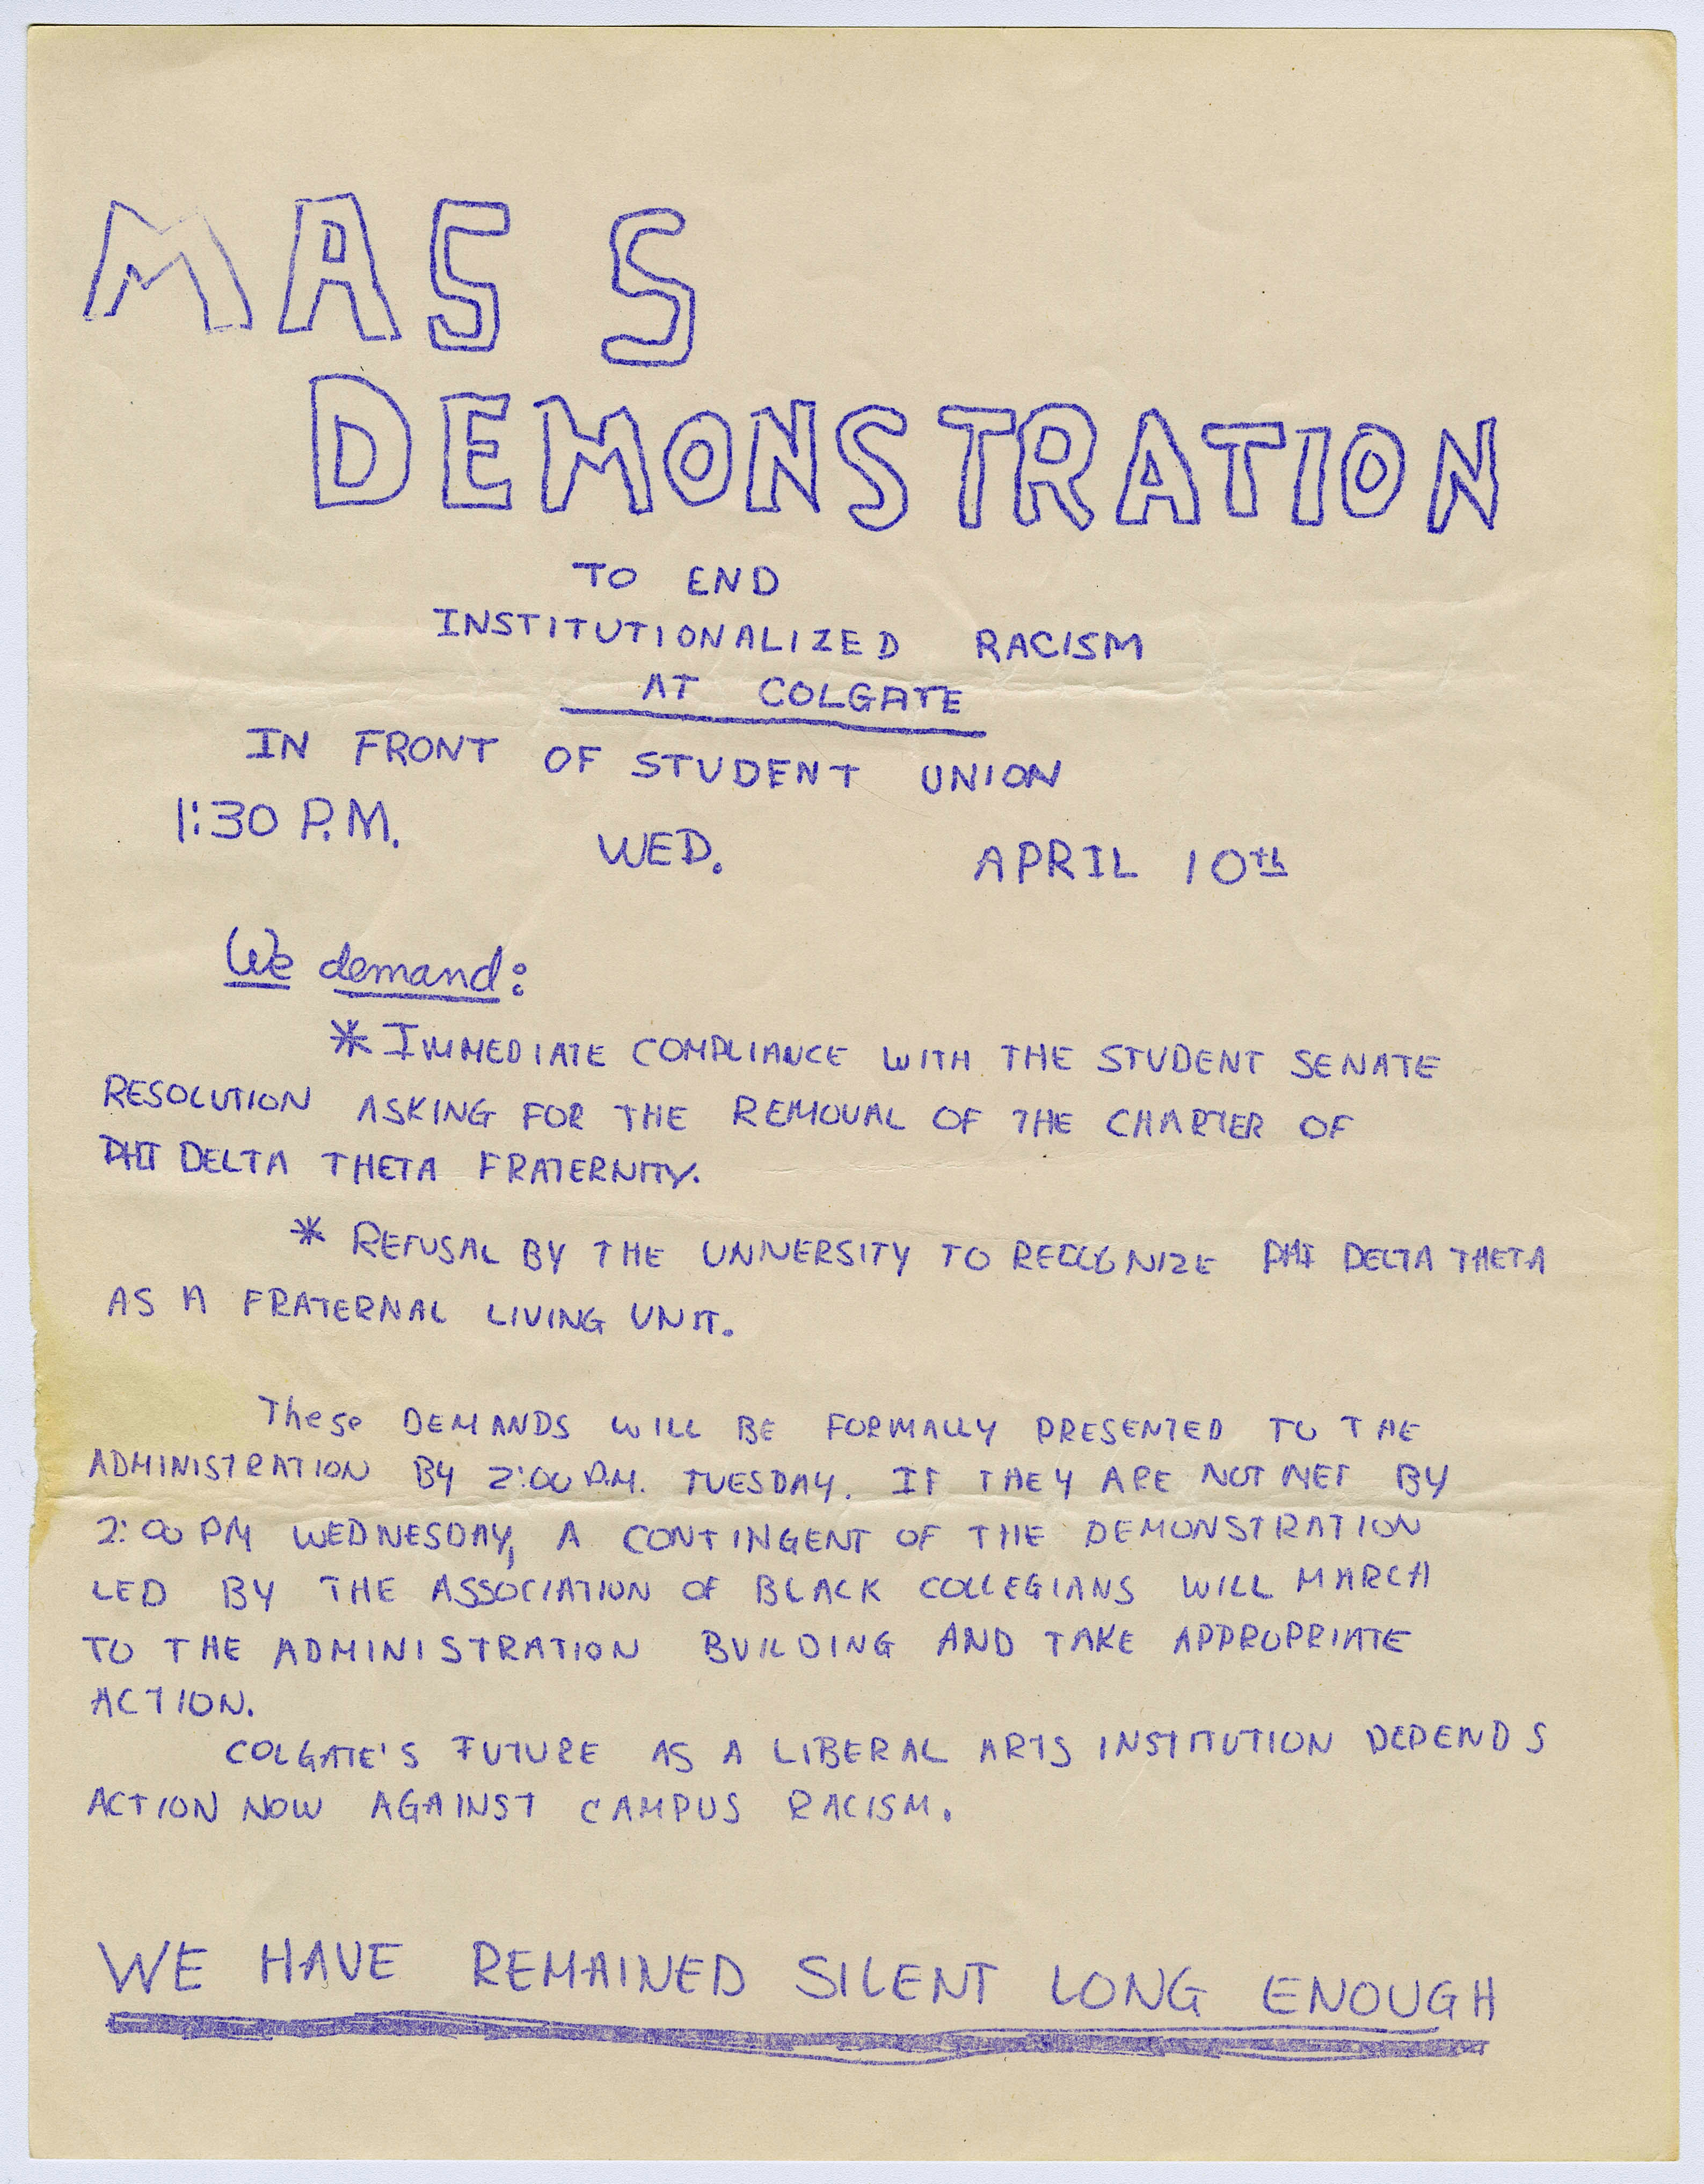 Flyer announces rally on campus, 1968